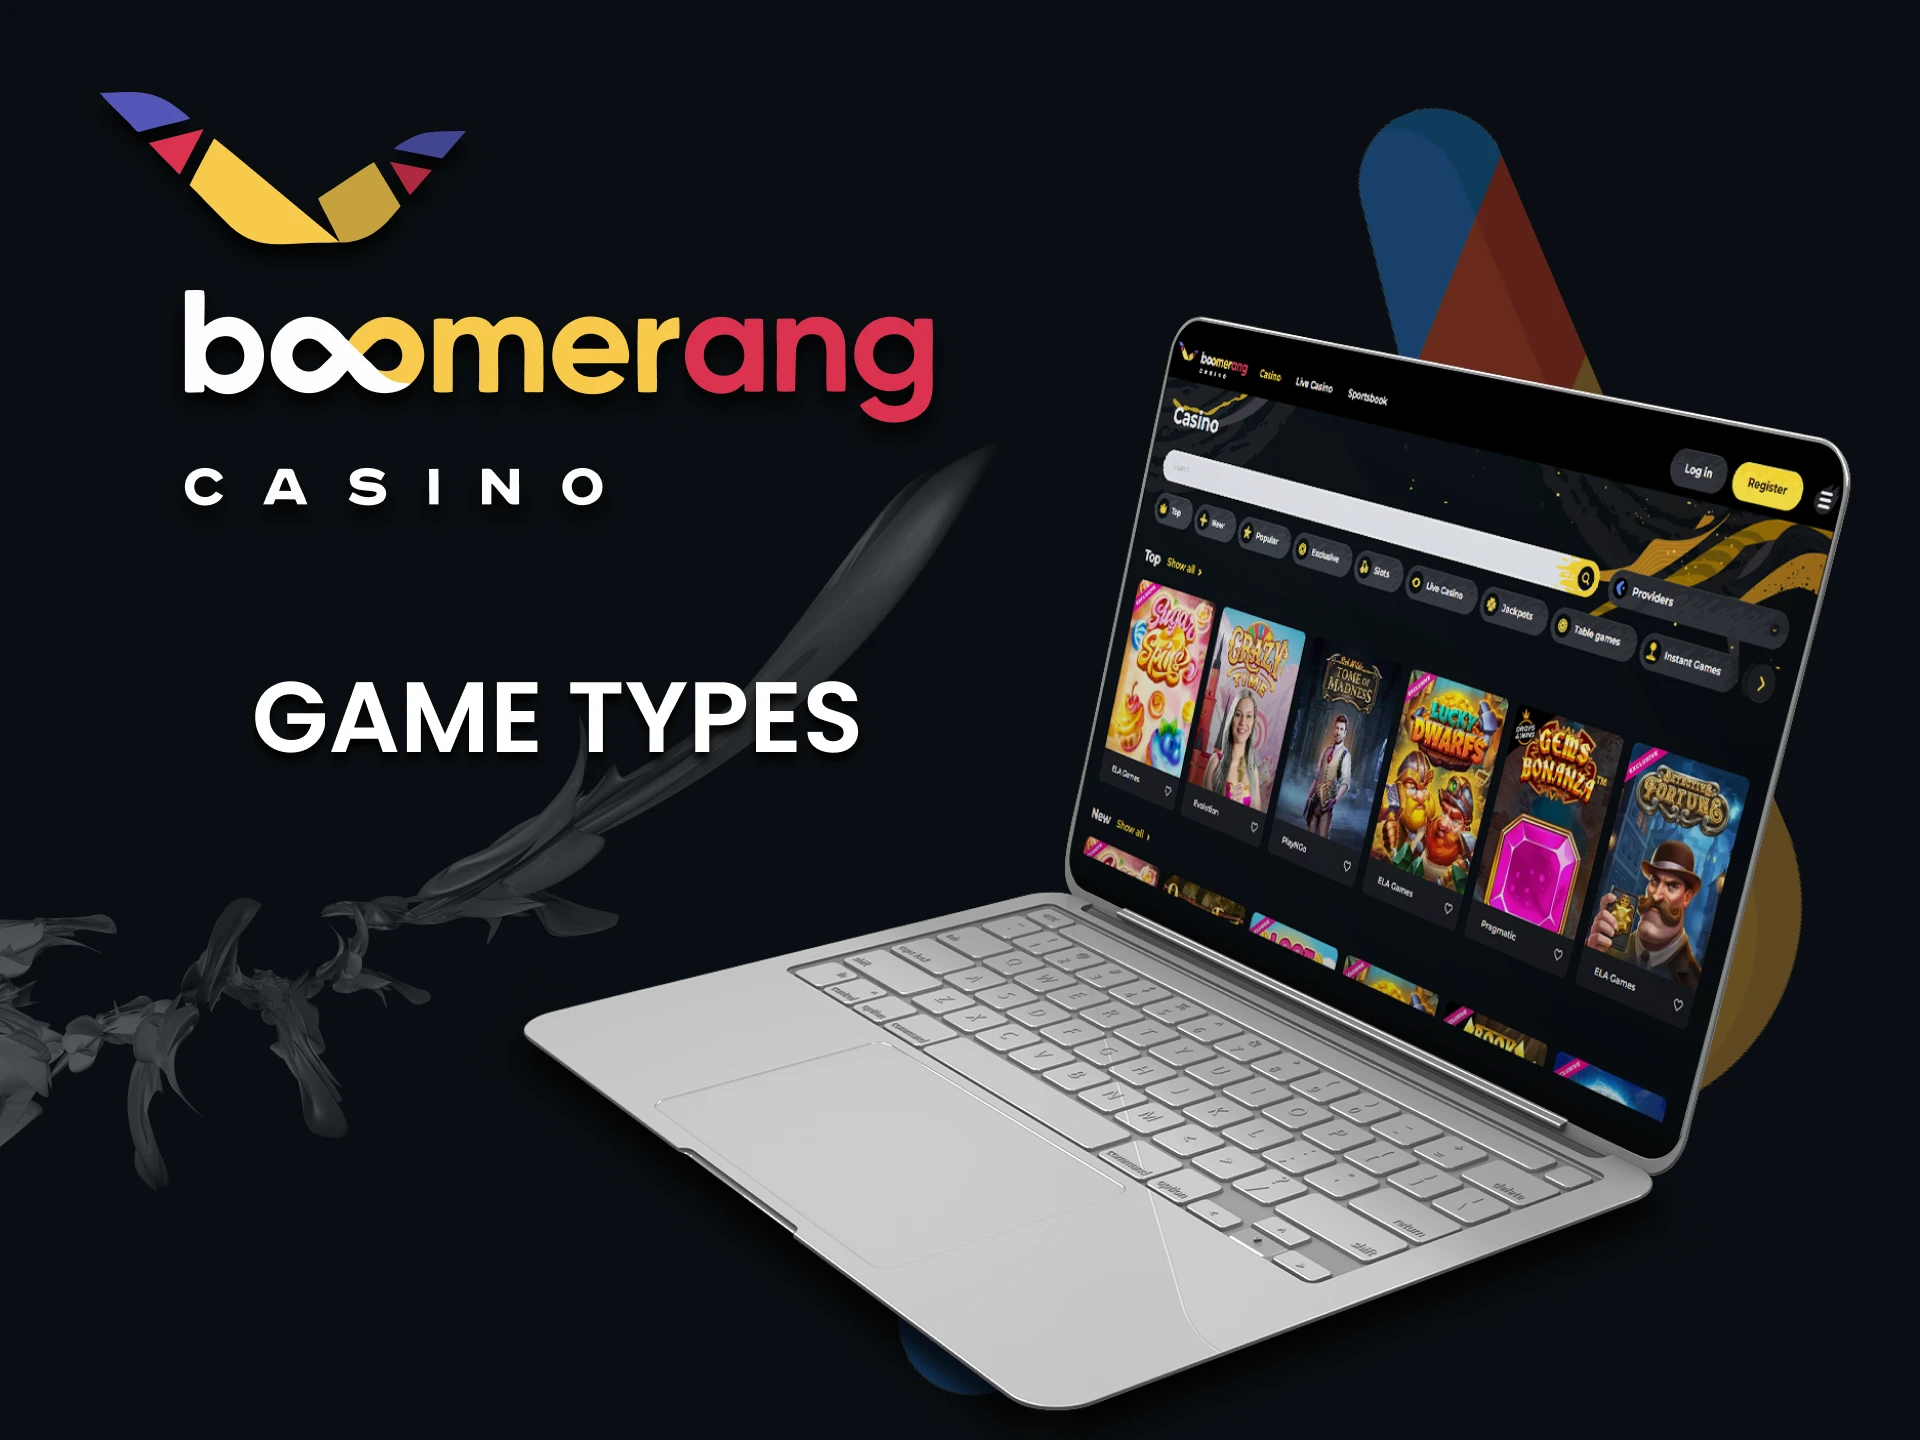 Learn the games at Boomerang Casino.